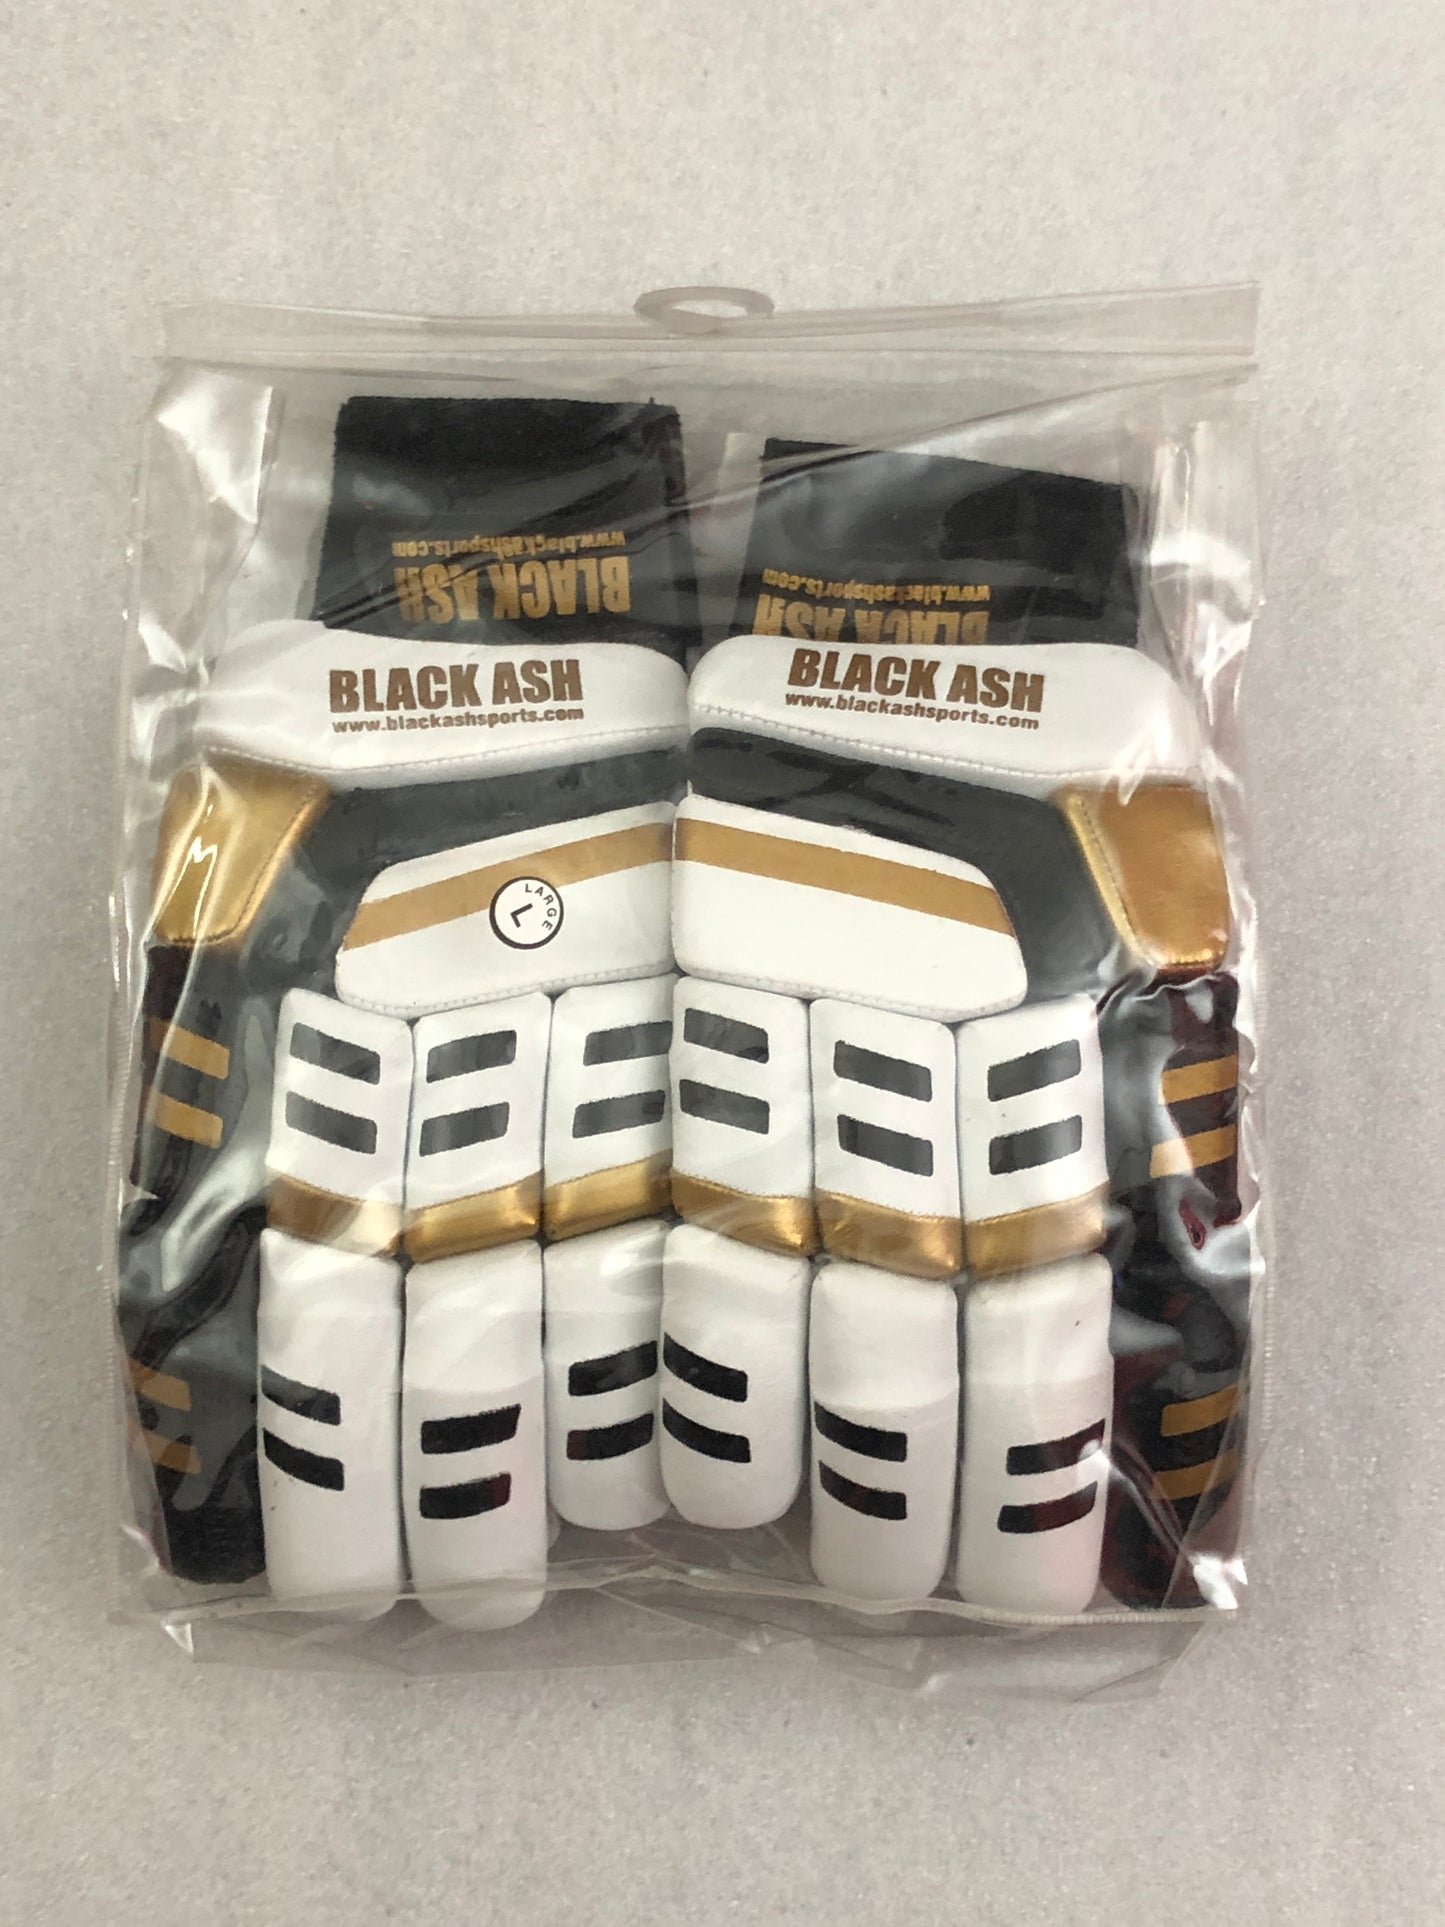 White/Gold Cricket Batting Gloves by Black Ash - Free Shipping